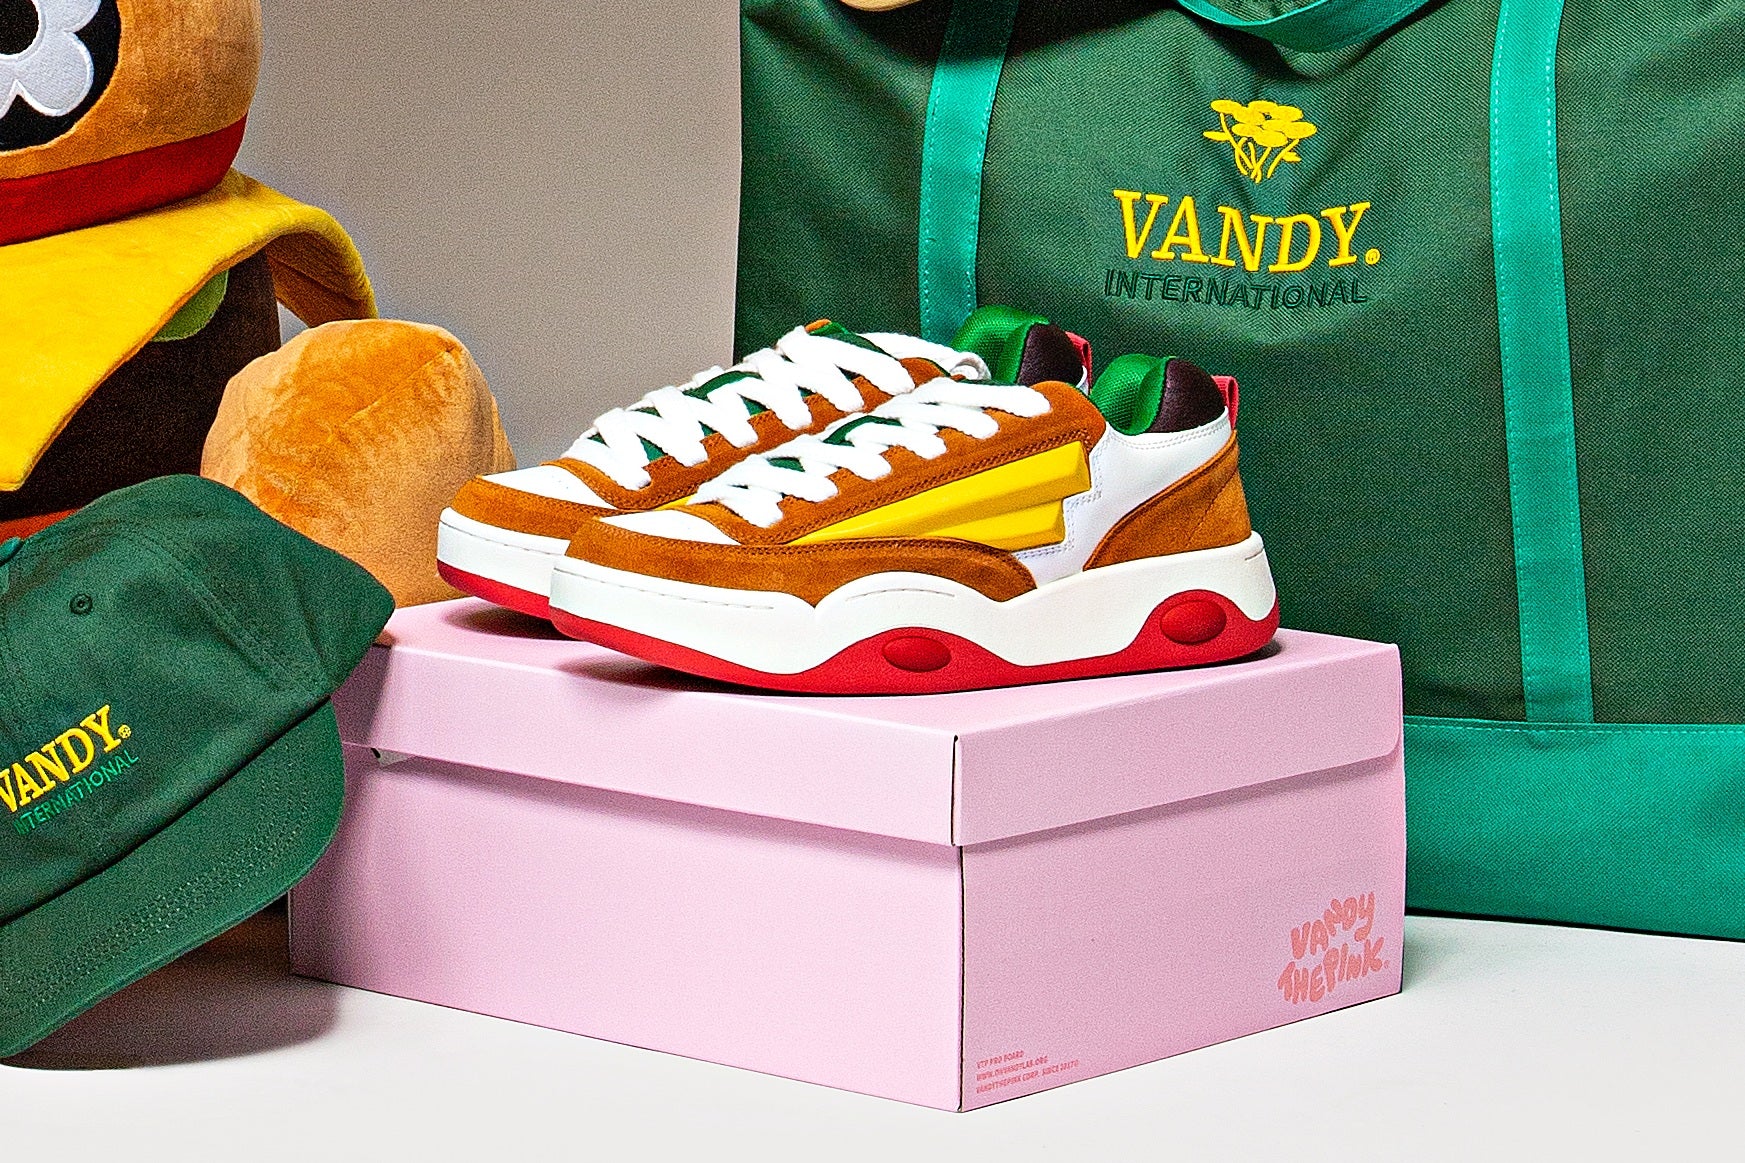 VANDY THE PINK DROPS PLAYFUL FAST FOOD-INSPIRED COLLECTION AT